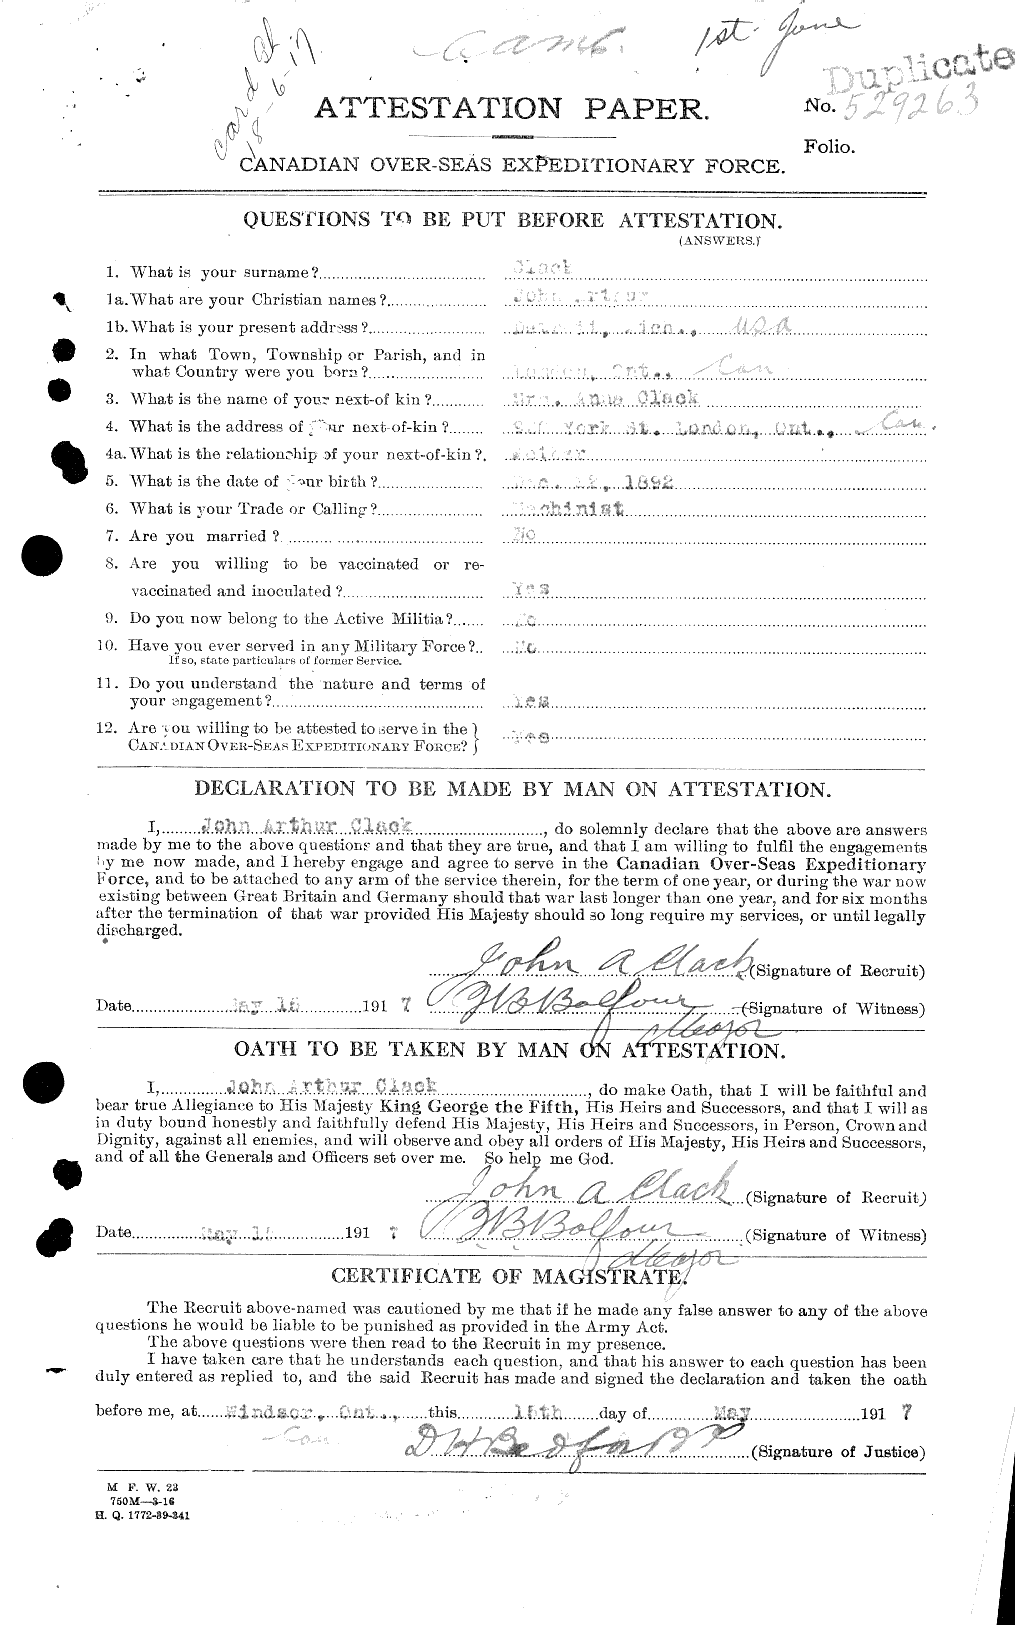 Personnel Records of the First World War - CEF 024561a